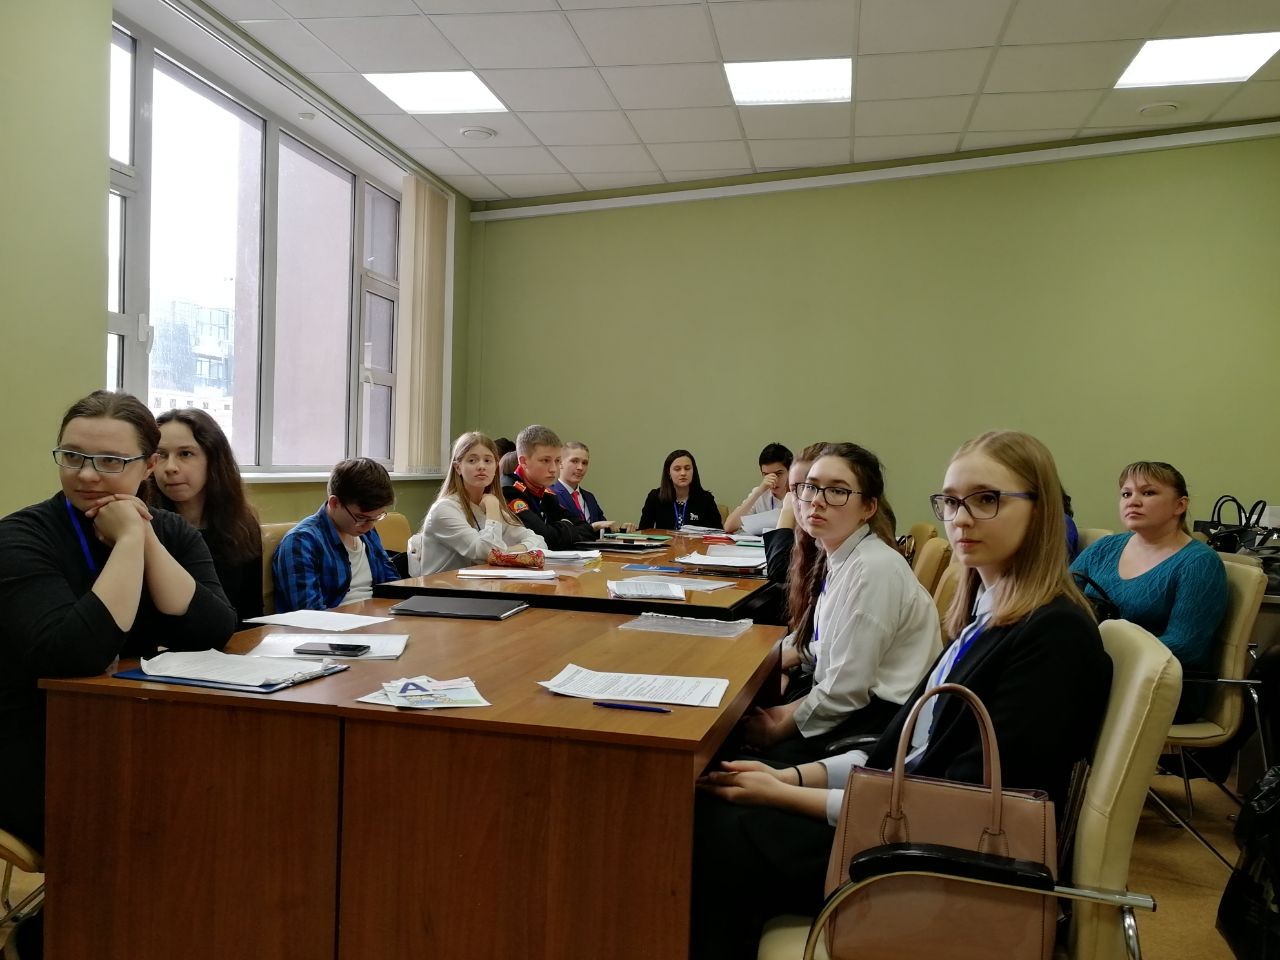 III All-Russian N.L. Lobachevsky Students Conference: Section Linguistic aspects of Germanic (English, German) and Romance (French, Spanish) languages ,III All-Russian N.L. Lobachevsky Students Conference: Section Linguistic aspects of Germanic (English, German) and Romance (French, Spanish) languages